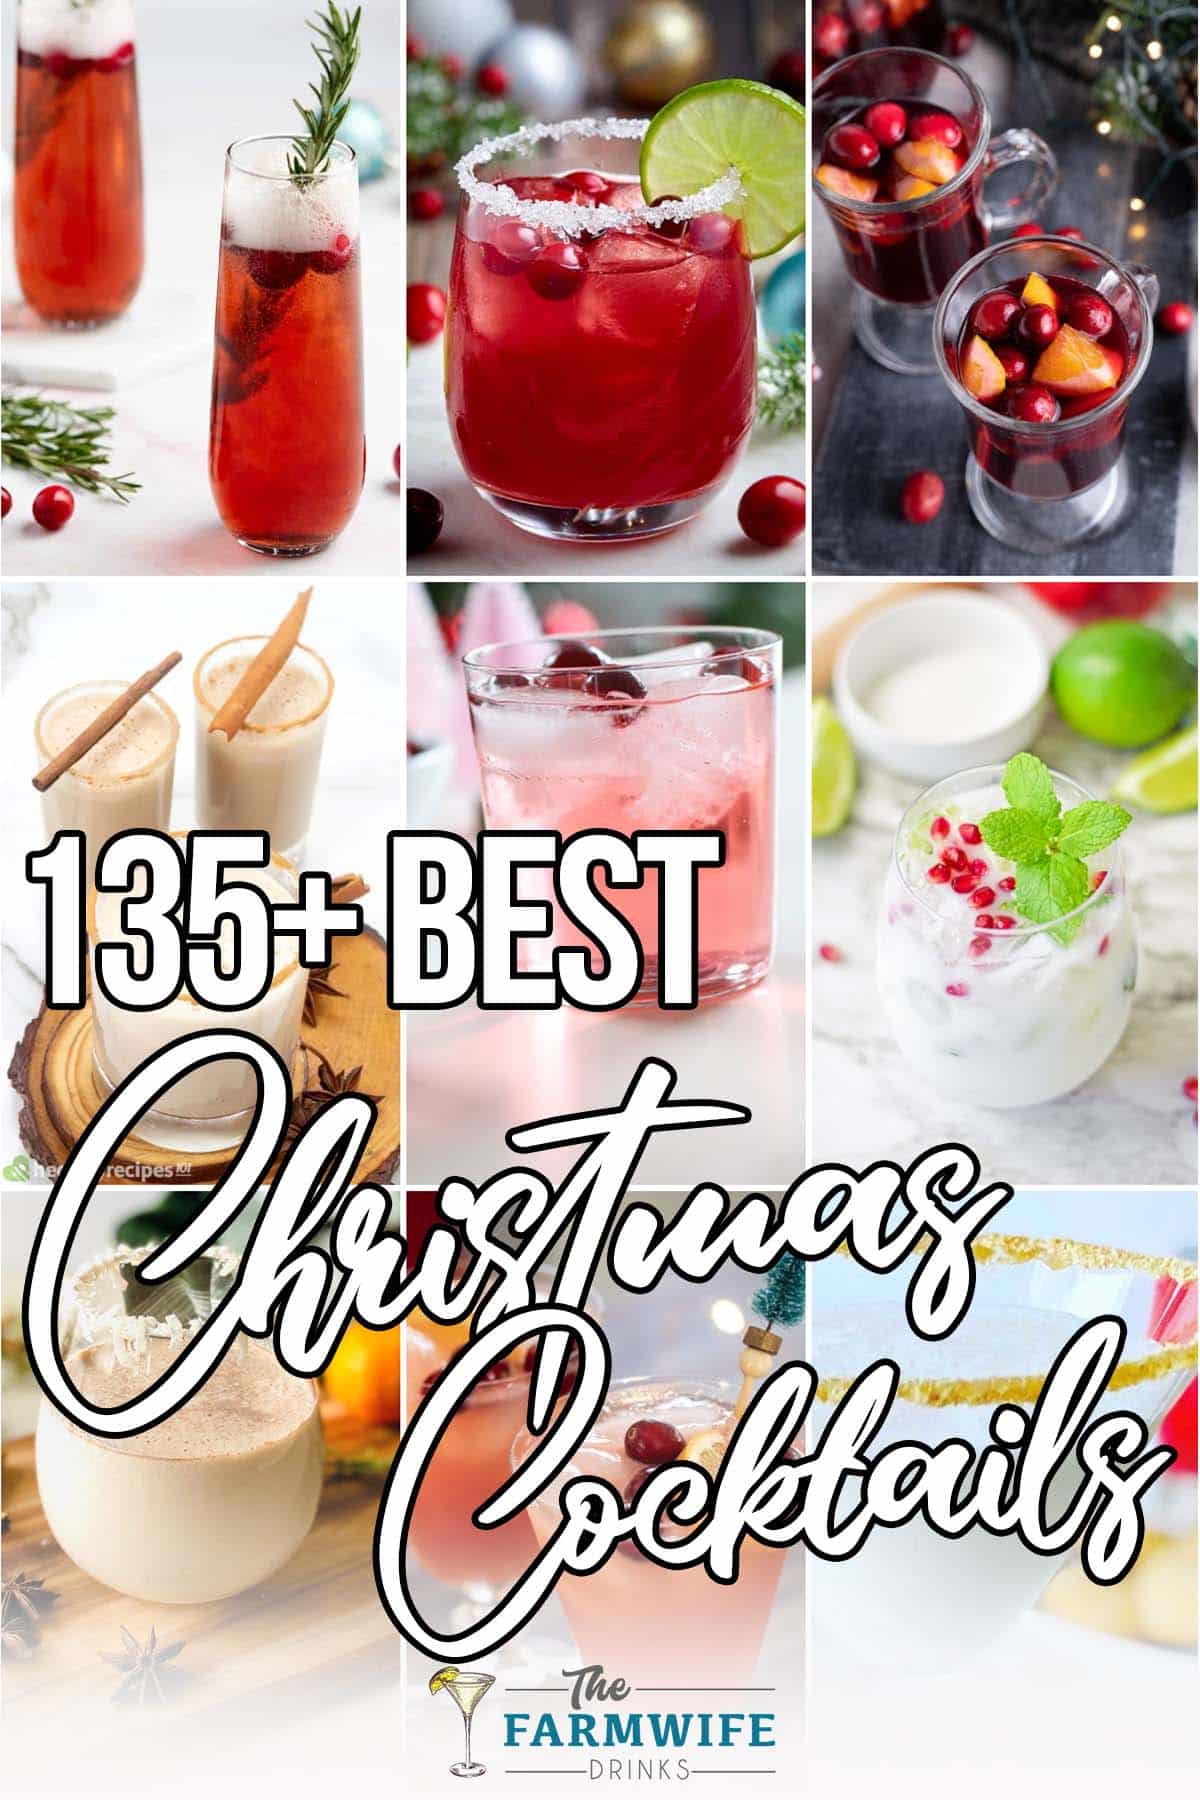 photo collage of holiday cocktail recipes with text which reads 135+ best christmas cocktails